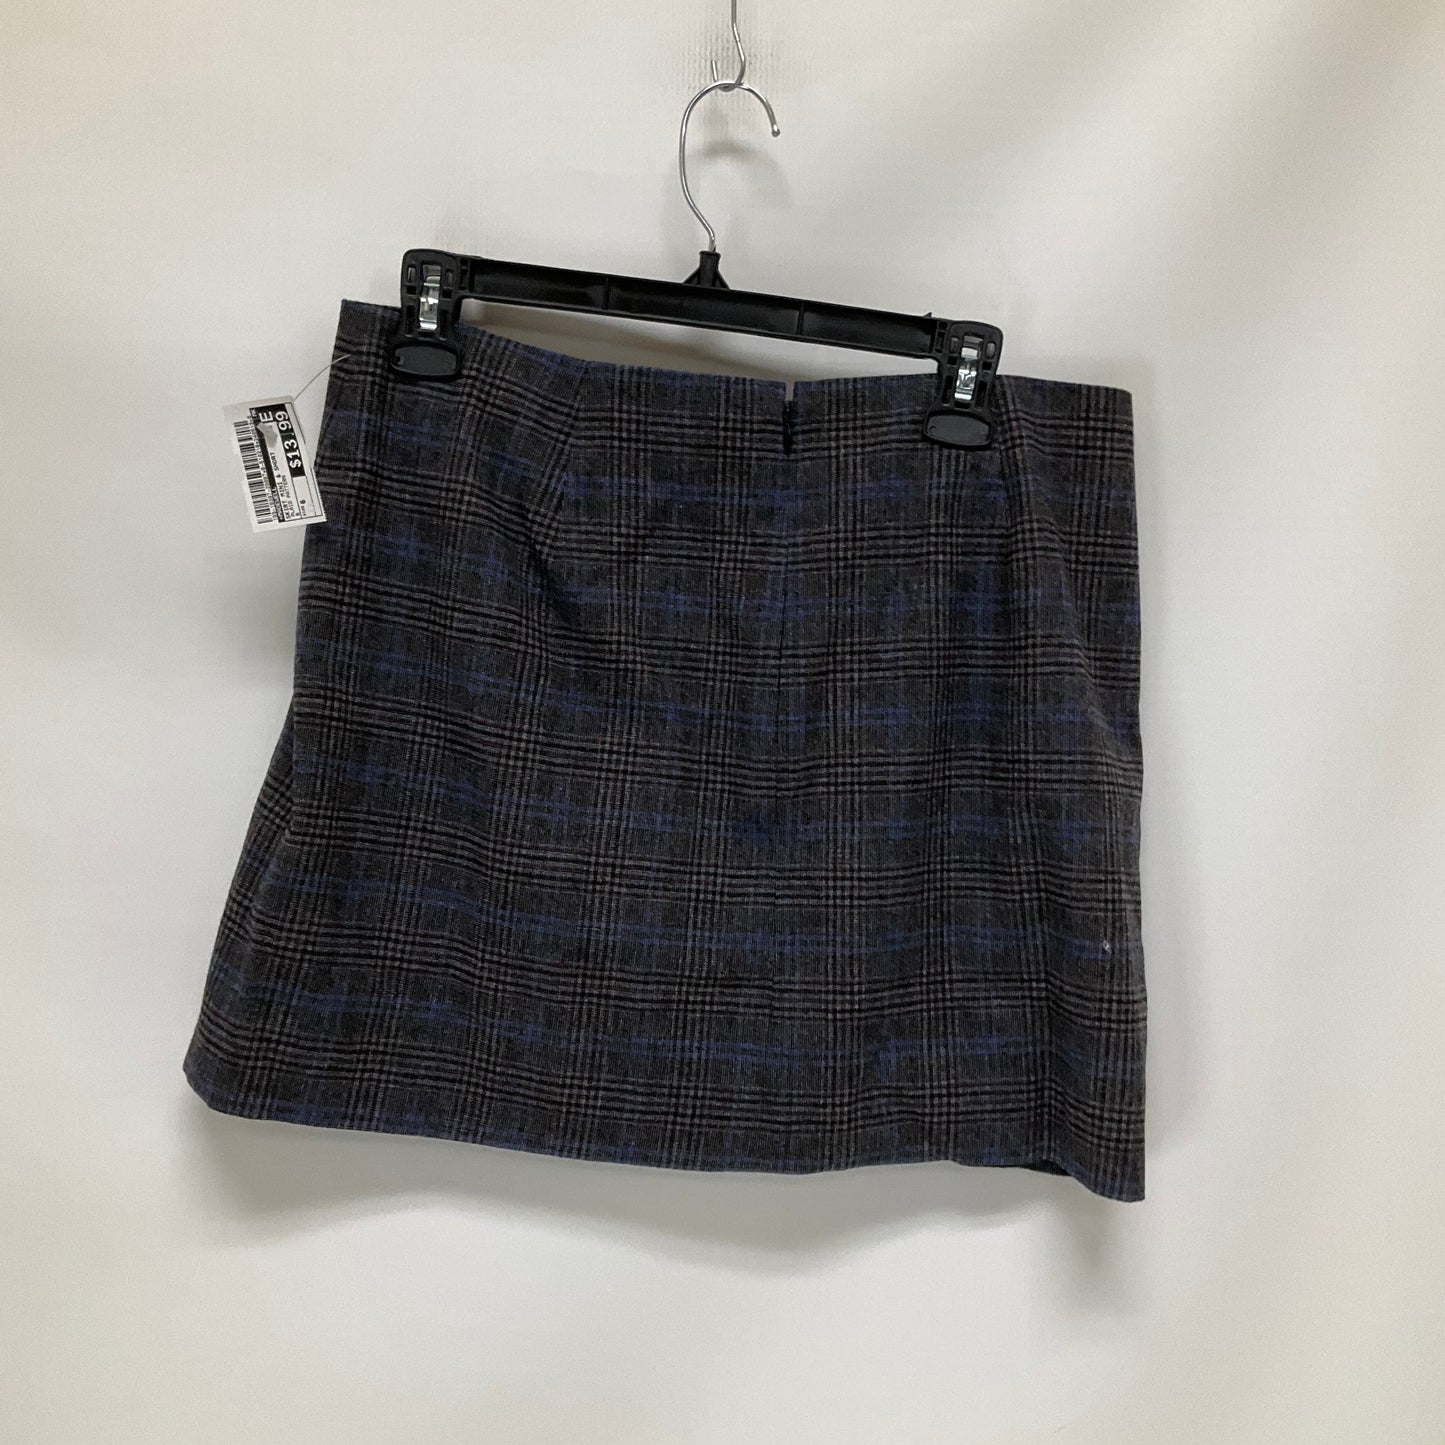 Skirt Mini & Short By Madewell  Size: 6